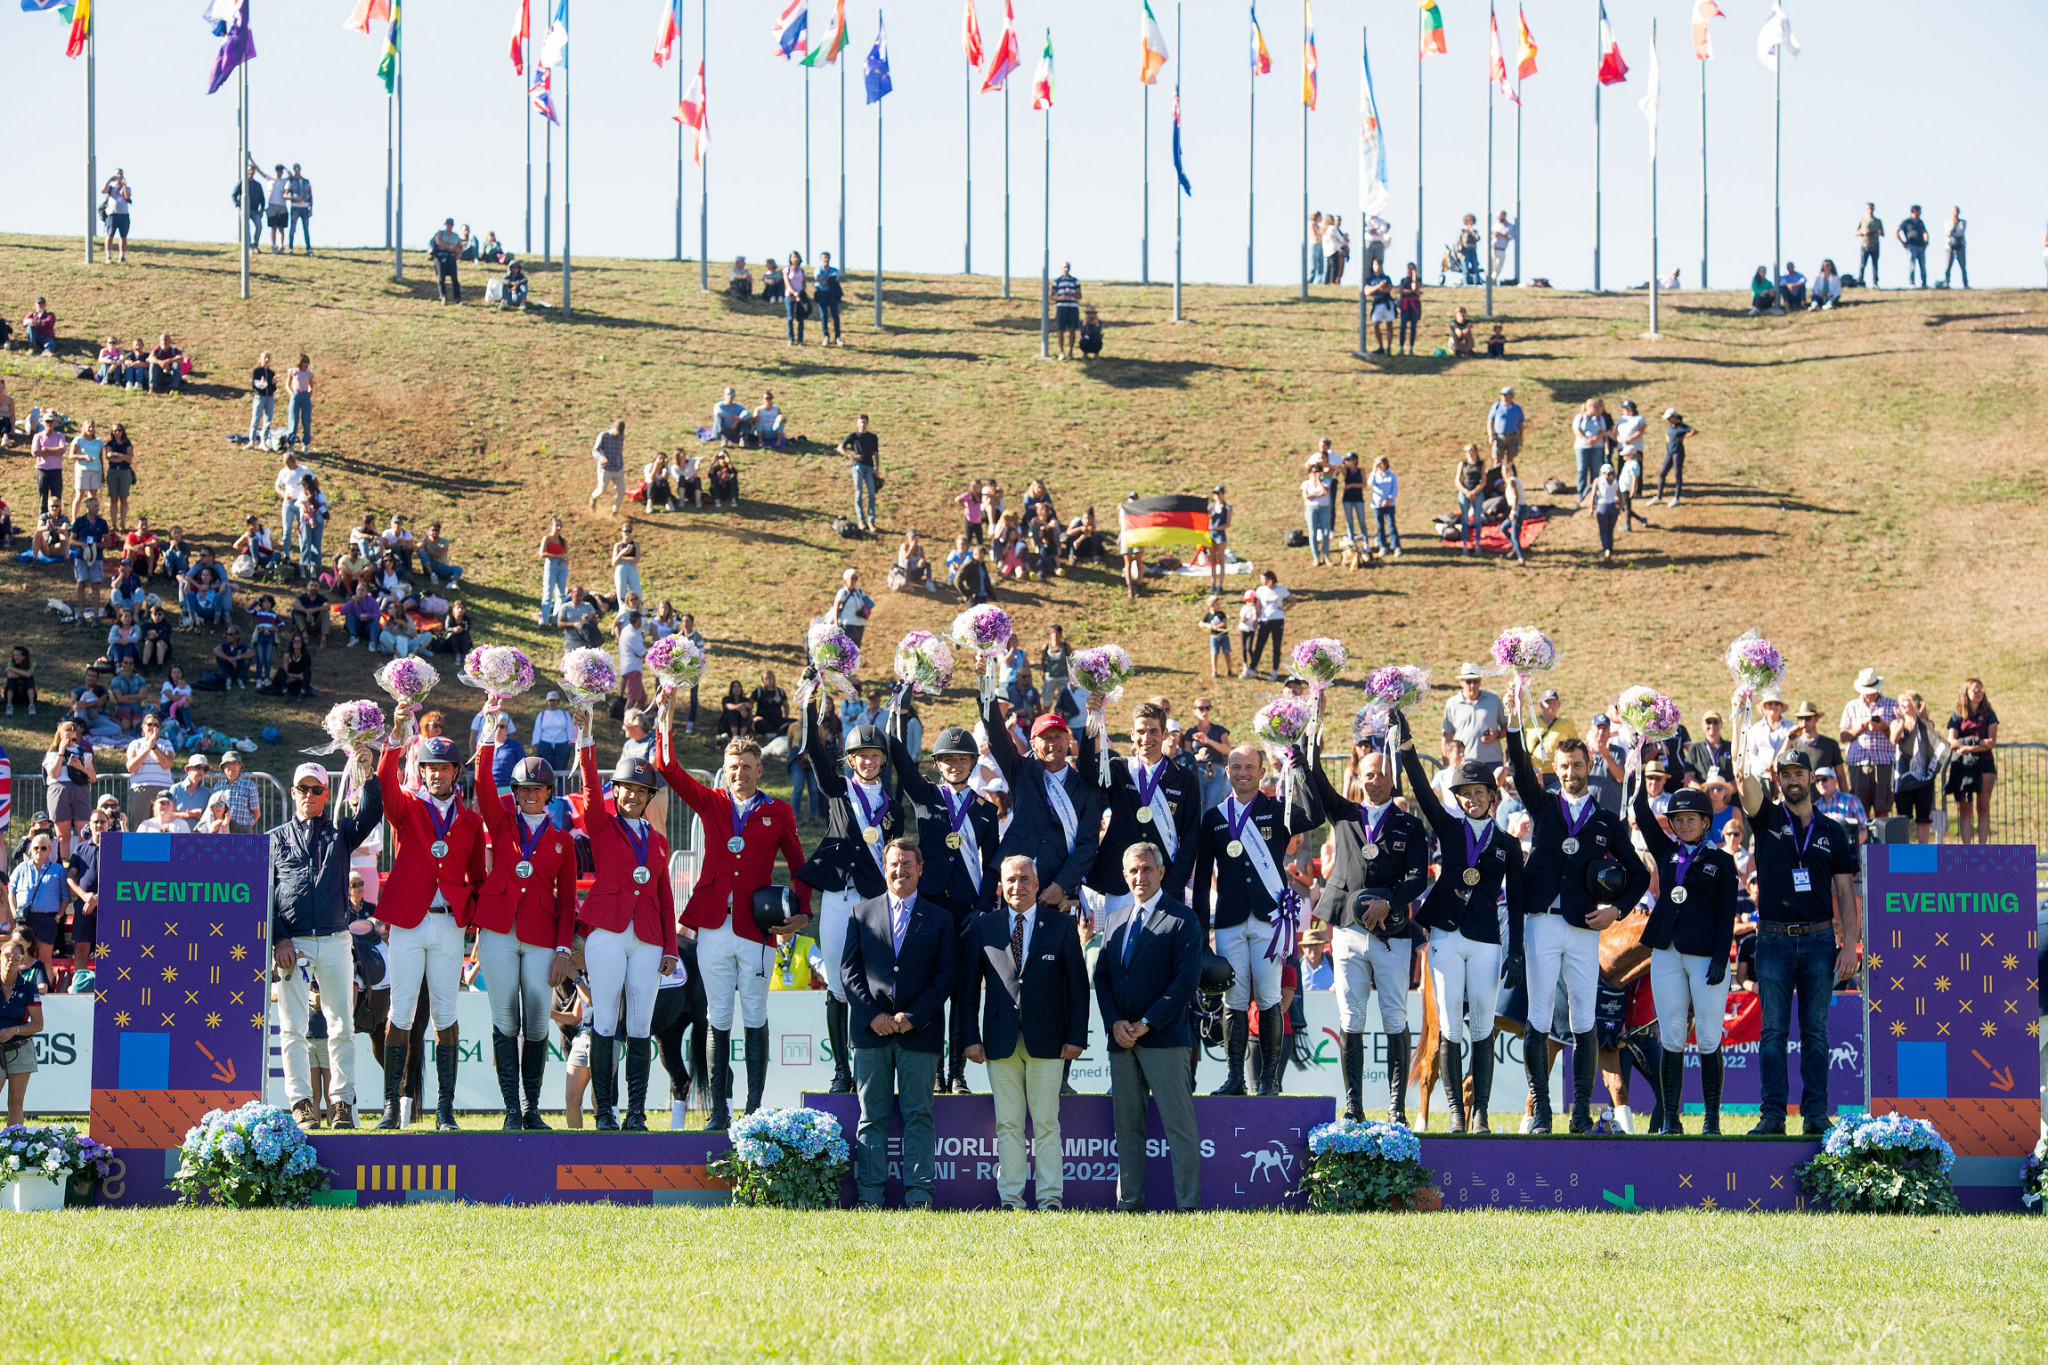 Germany were victorious in the team event at the Eventing World Championships ©FEI